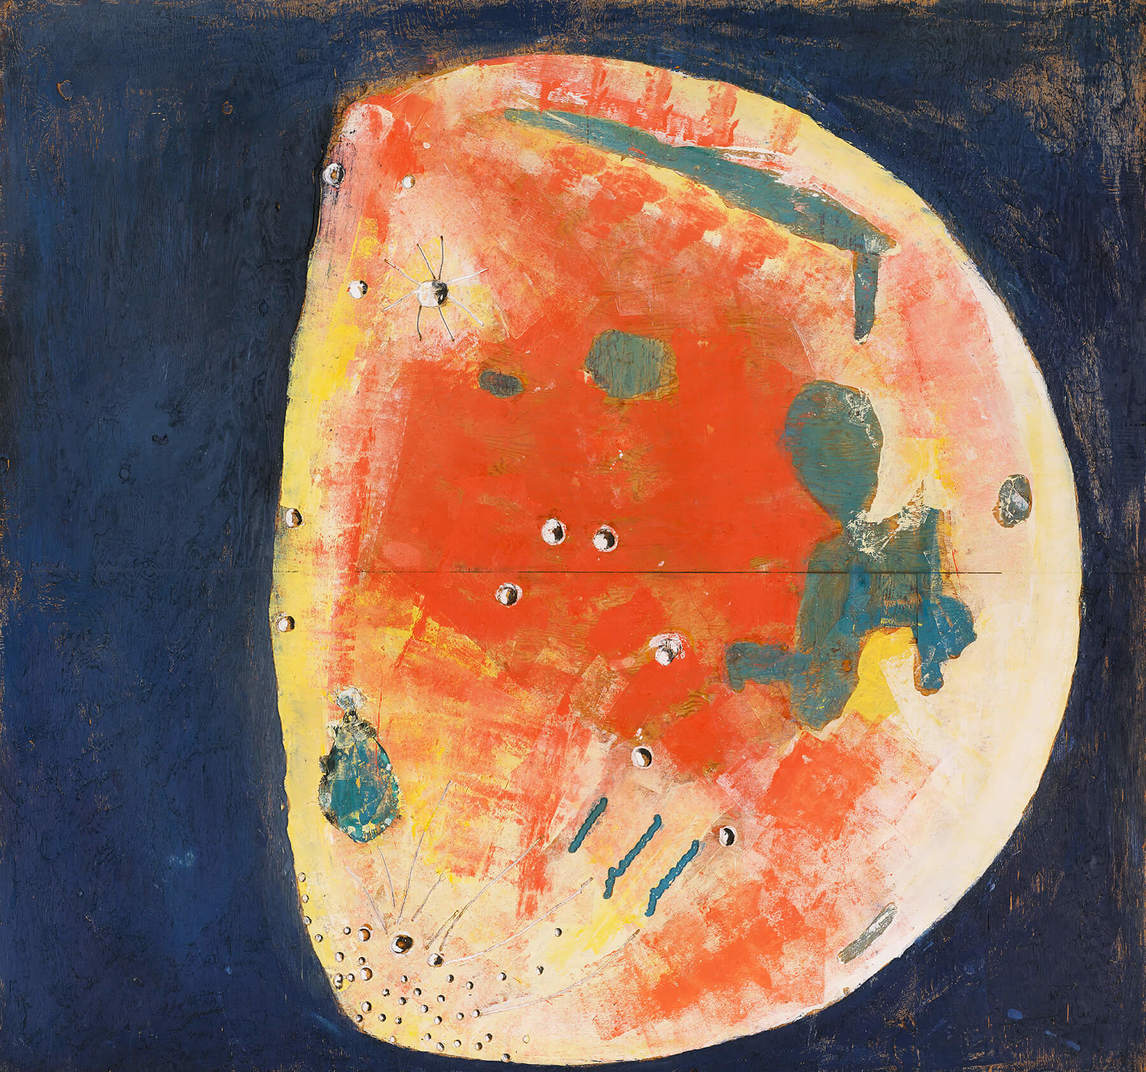 Paterson Ewen, Gibbous Moon (Lune gibbeuse), 1980